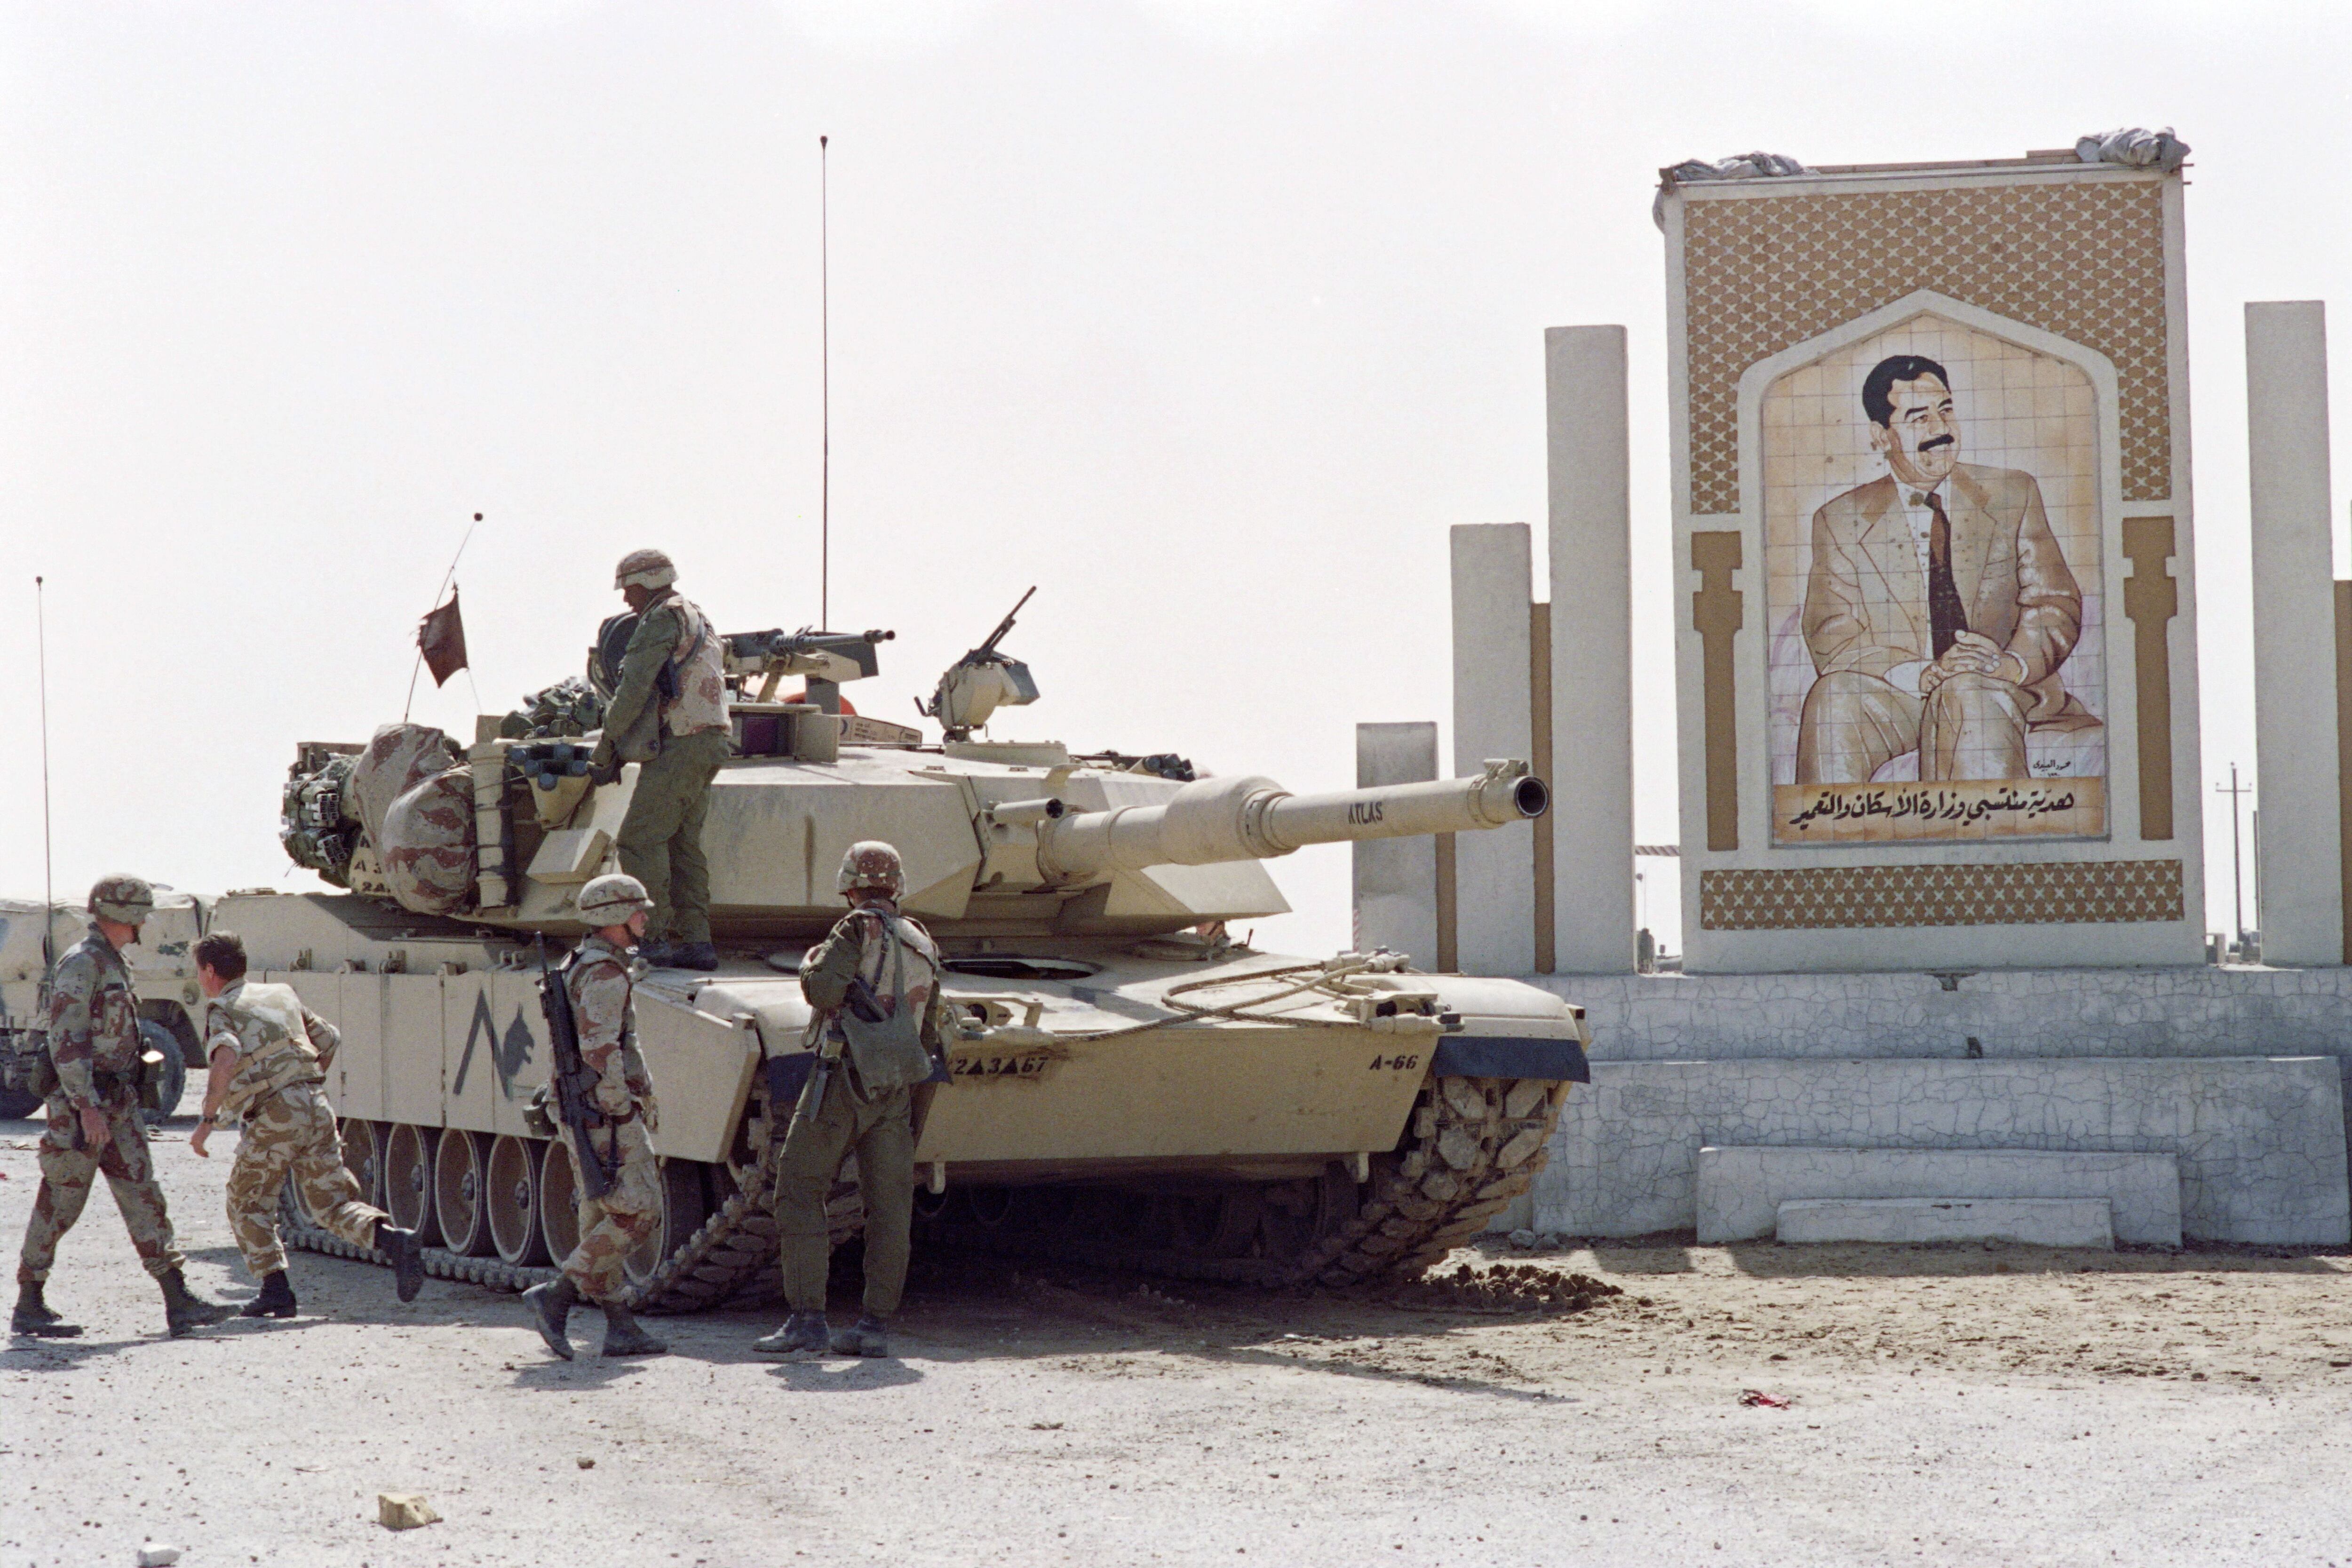 American soldiers stand next to an Abrams M1 A1 tank near a photograph of Iraqi President Saddam Hussein, on the outskirts of Kuwait City, March 1, 1991. (Photo by Pascal GUYOT/AFP).